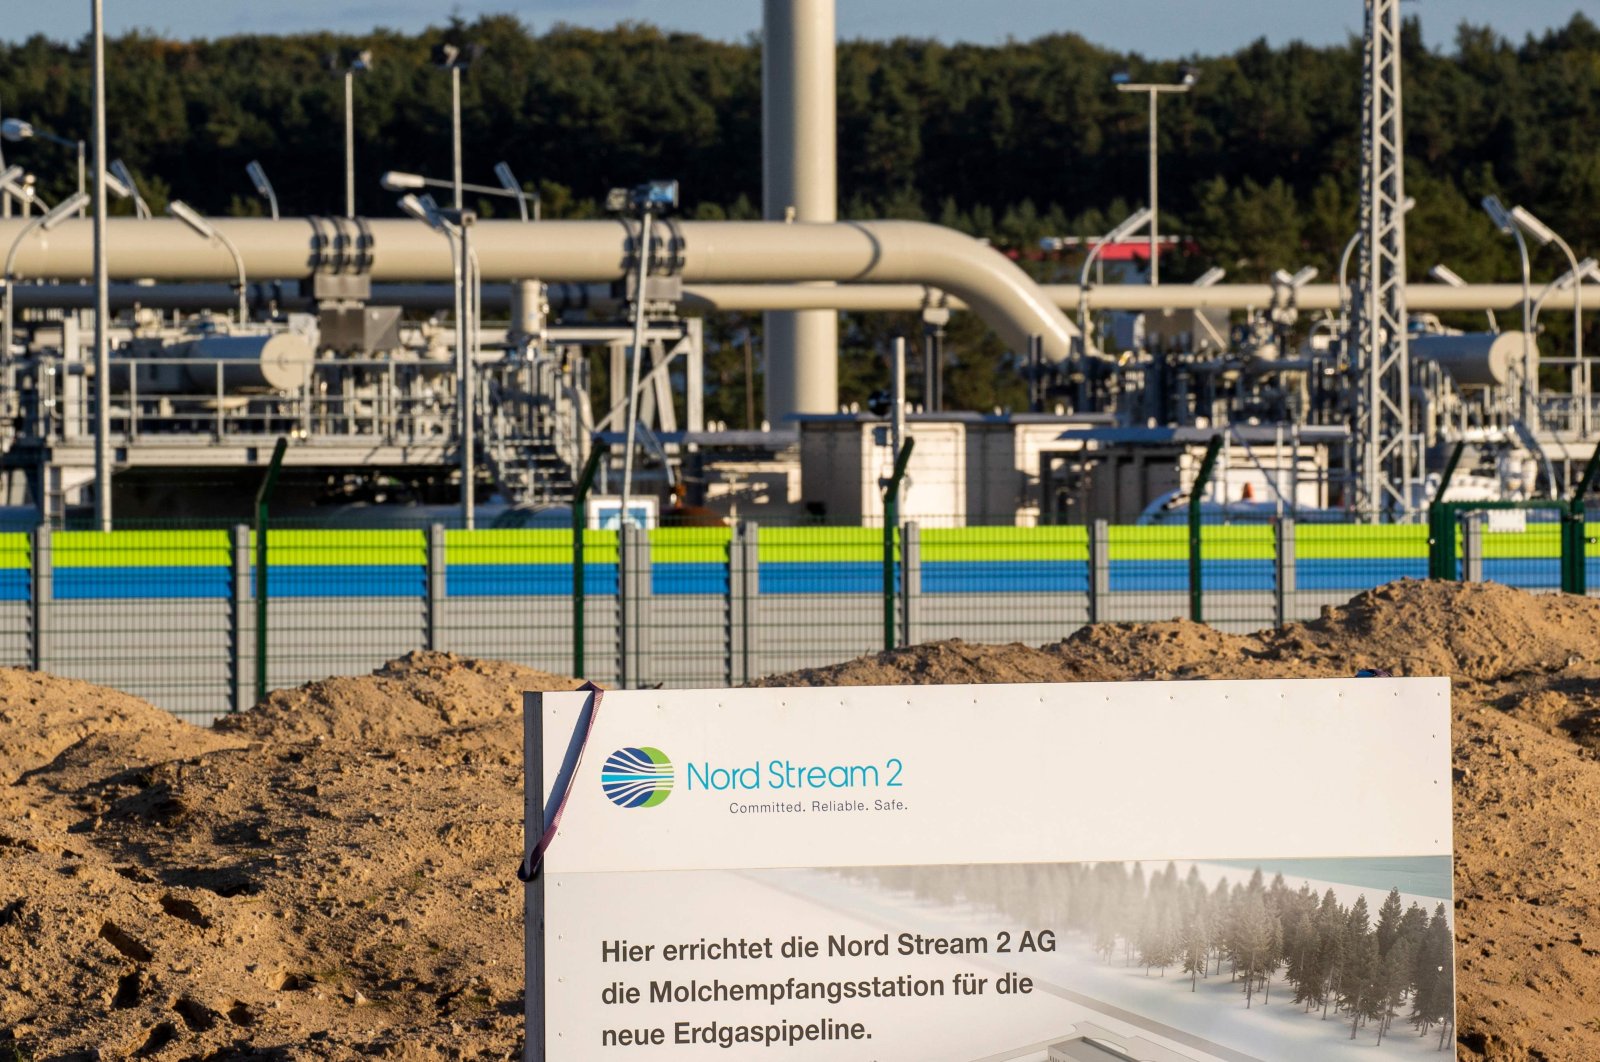 The Nord Stream 2 gas line landfall facility in Lubmin, north eastern Germany, Sept. 7, 2020. (AFP Photo)